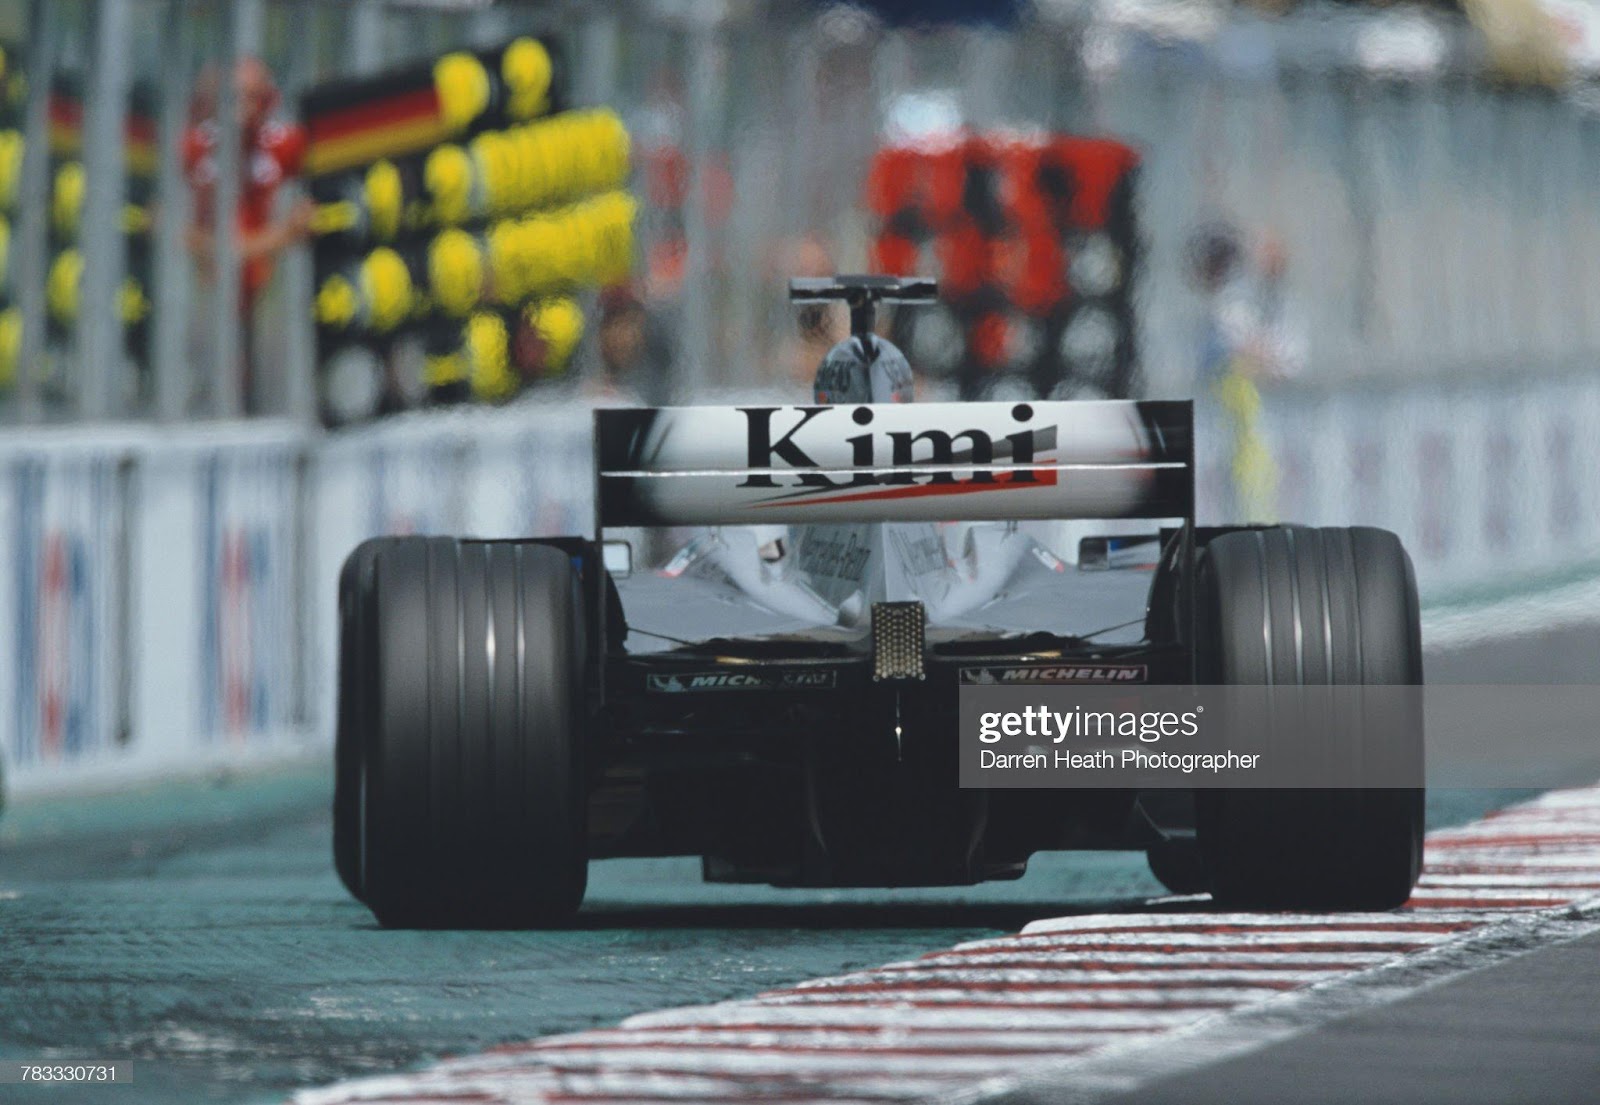 Kimi Raikkonen drives the n. 4 McLaren MP4-17 Mercedes V10 to second place during the F1 French Grand Prix on 21 July 2002 at the Circuit de Nevers Magny-Cours, France.